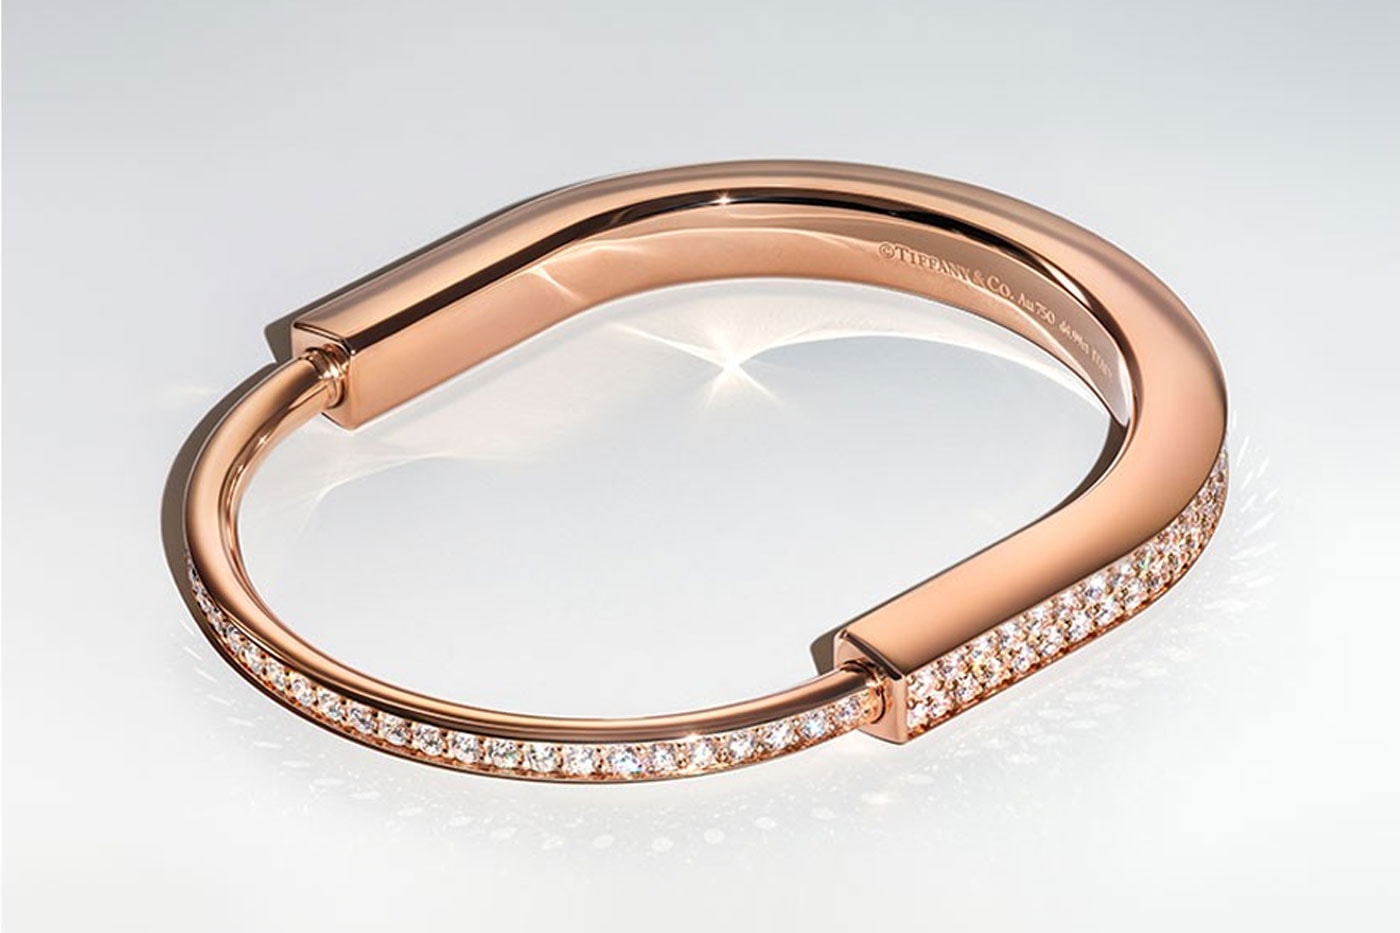 Tiffany and co lock bangle bracelet white yellow rose gold pave diamonds love release info date price